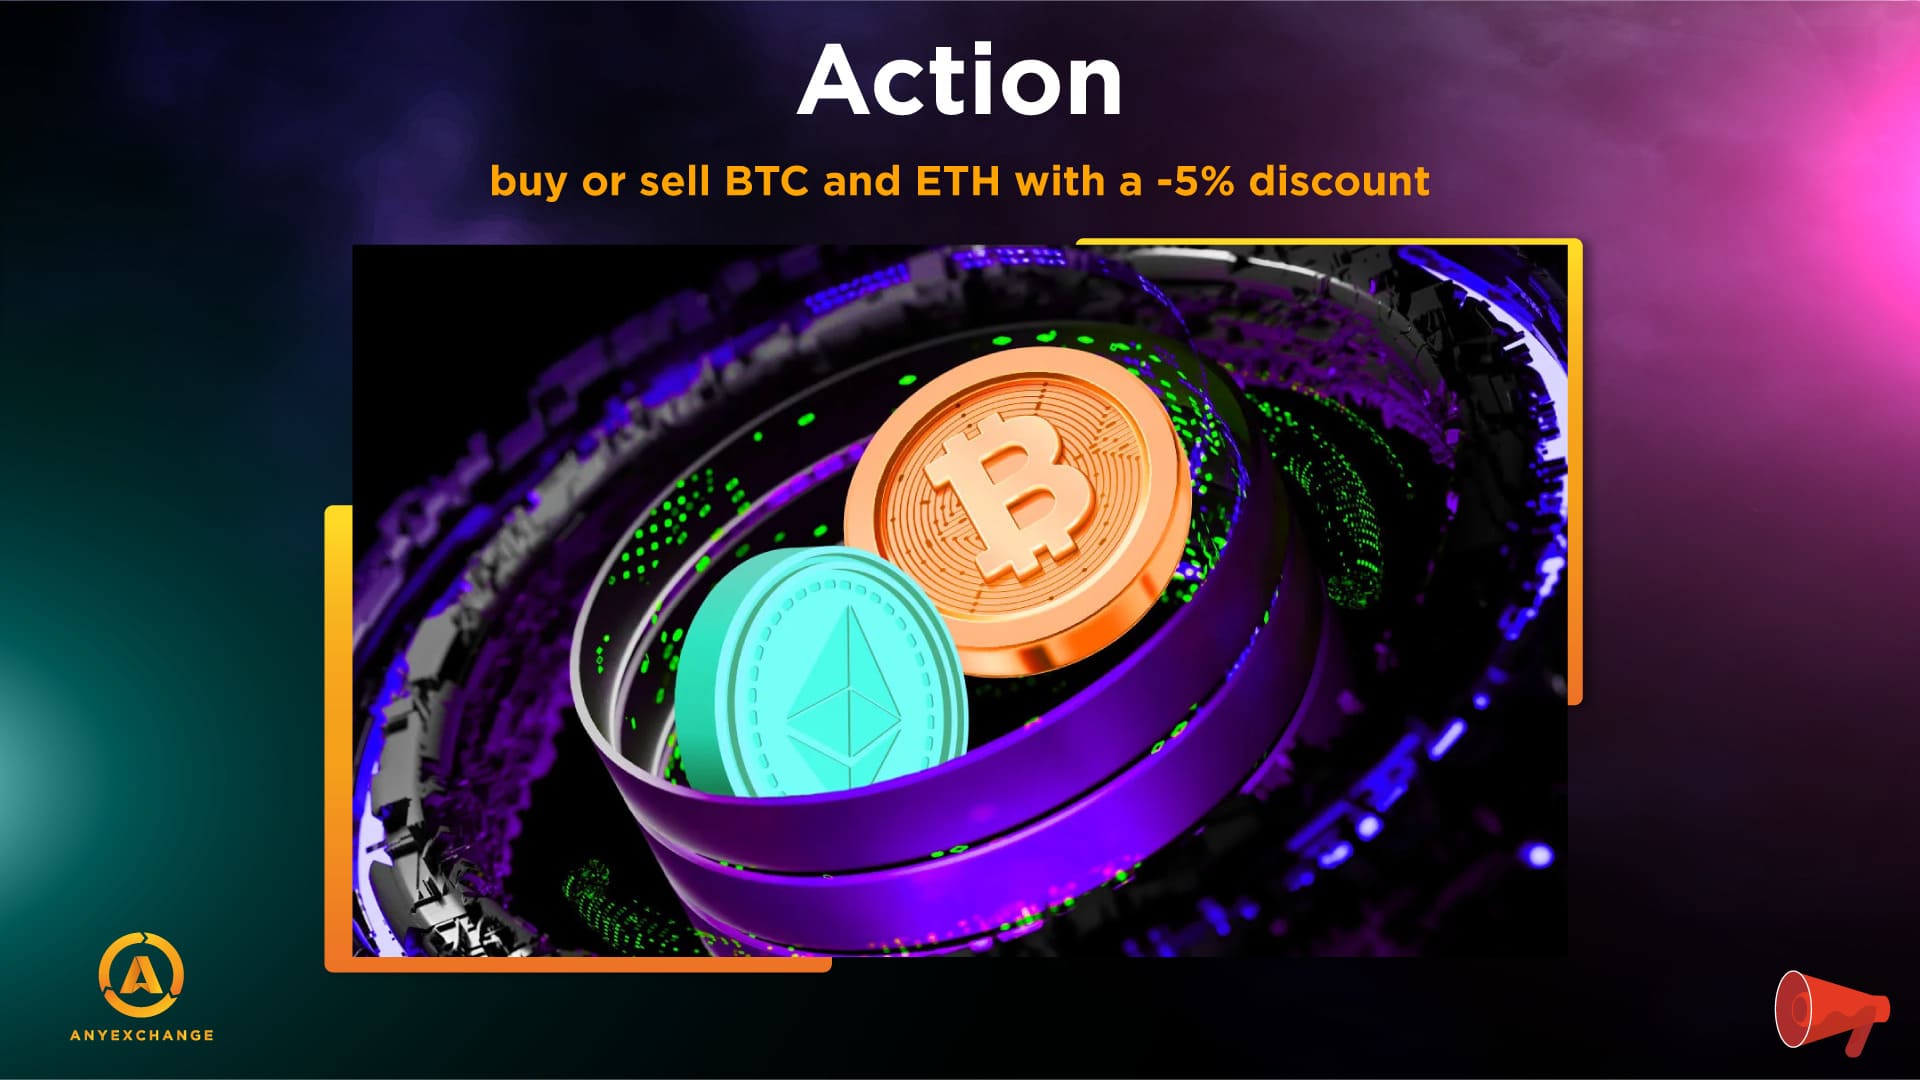 Promotion: 5% discount on the purchase and sale of BTC and ETH